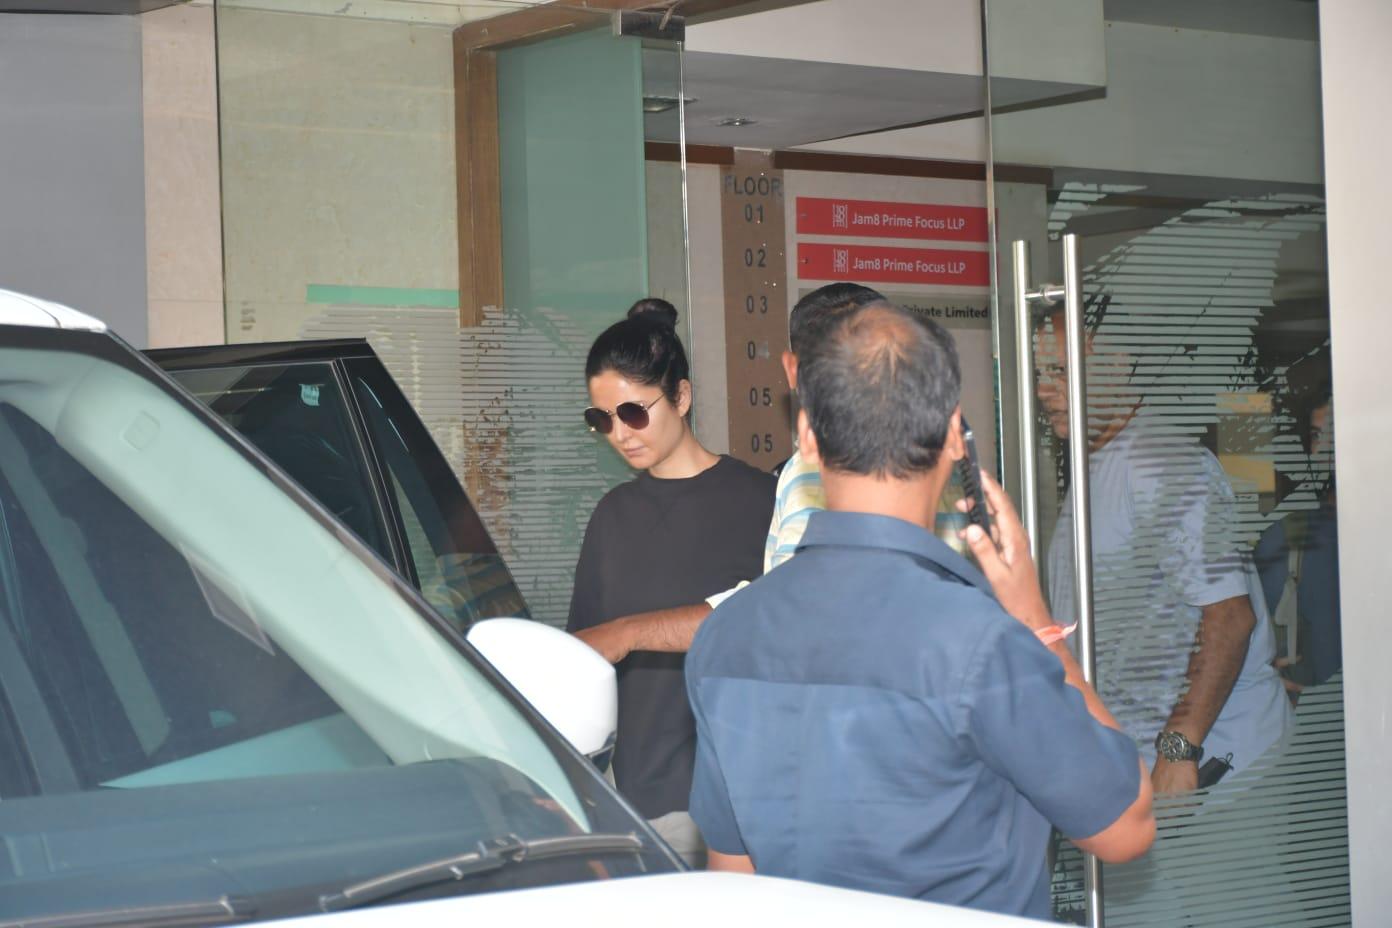 The versatile actress Katrina Kaif was snapped in the city in a casual outfit